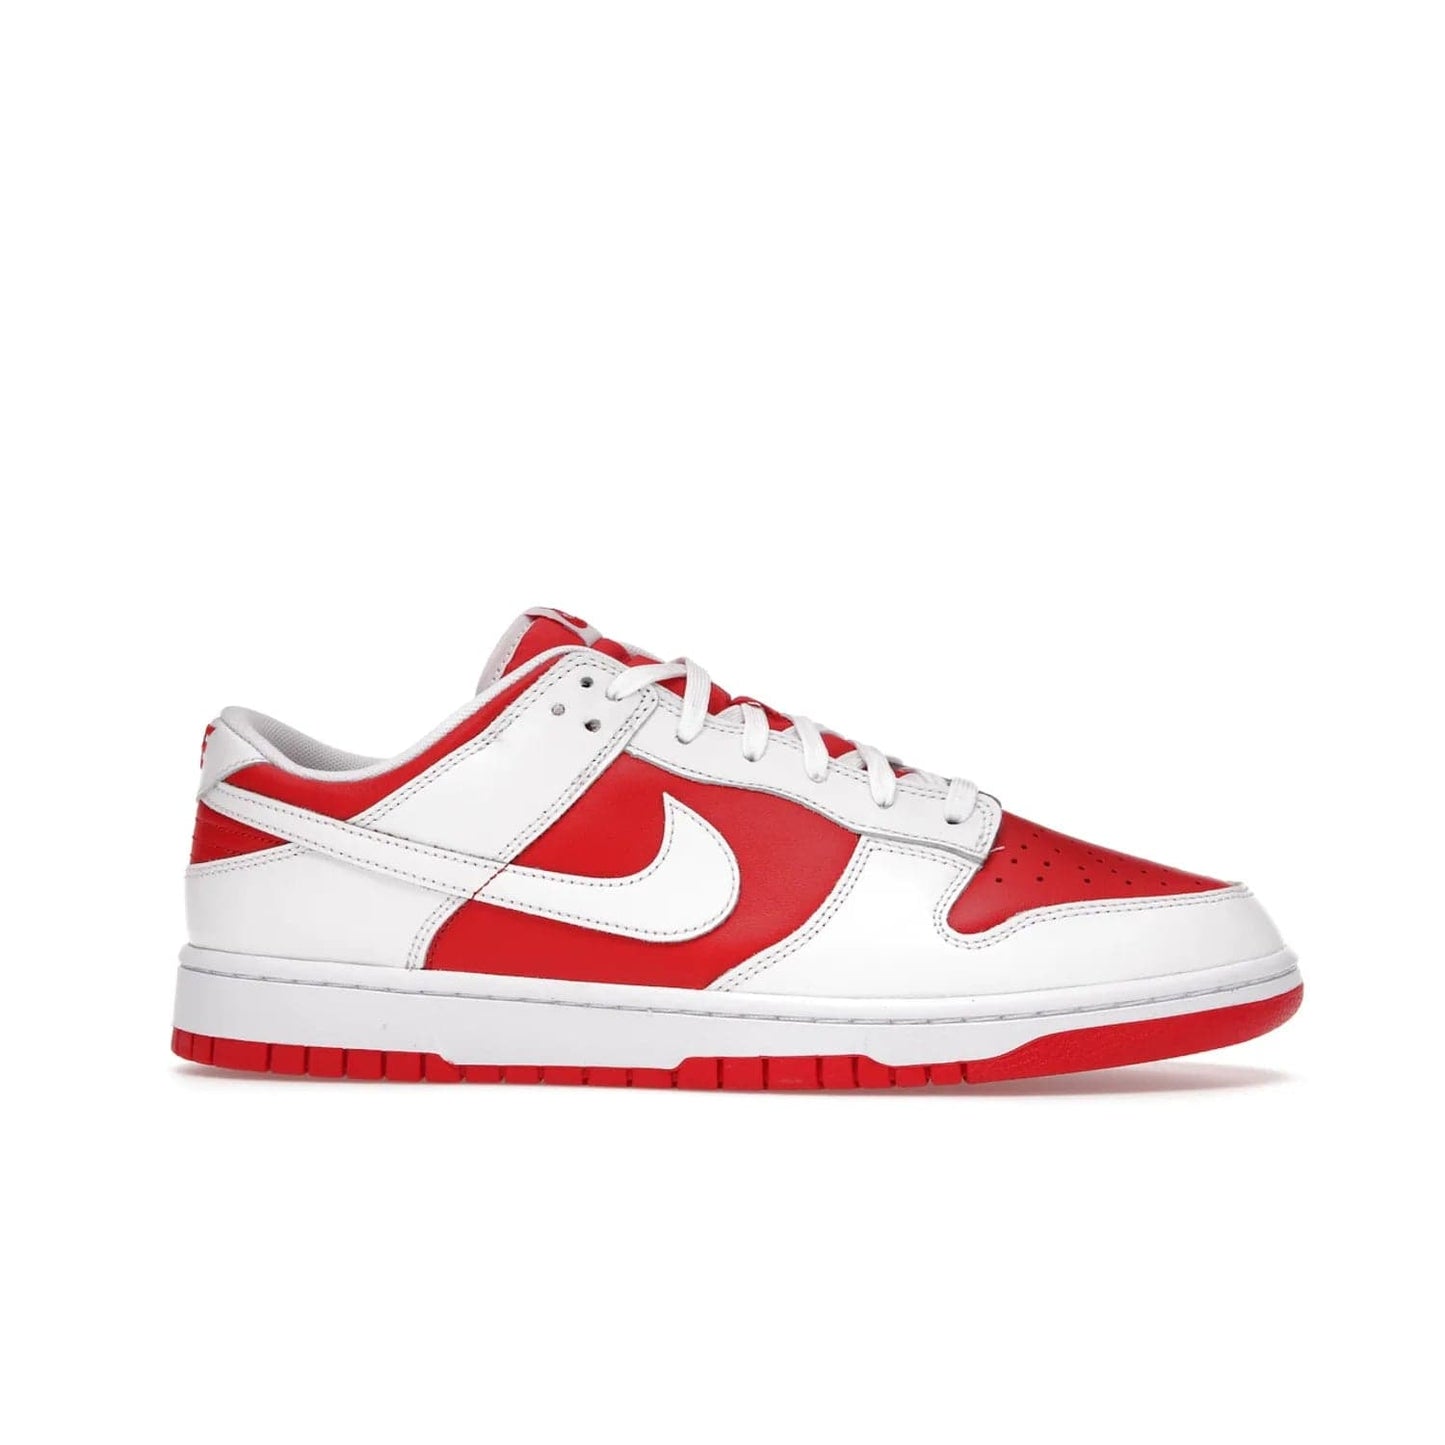 Nike Dunk Low Championship Red (2021) - Image 2 - Only at www.BallersClubKickz.com - A bold and stylish Nike Dunk Low Championship Red from 2021 with a classic retro design. University Red upper, white leather overlays and Swooshes, and a woven tongue label. Make a statement with these sleek kicks!